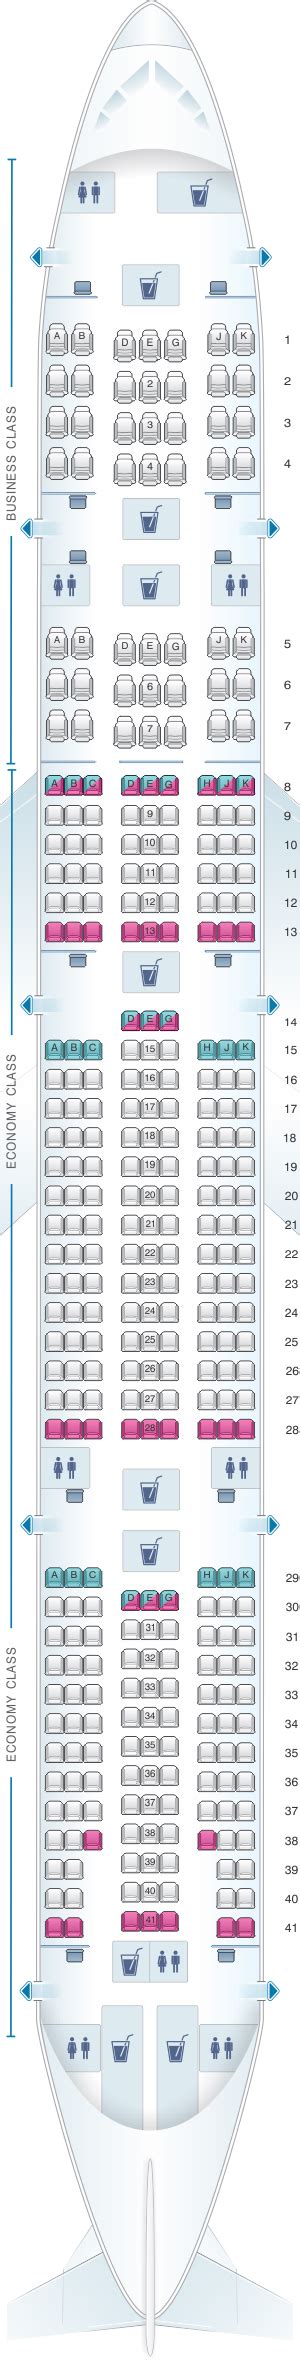 Boeing 777 300Er Seat Map Boeing 777 300 Seat Map Philippine Airlines